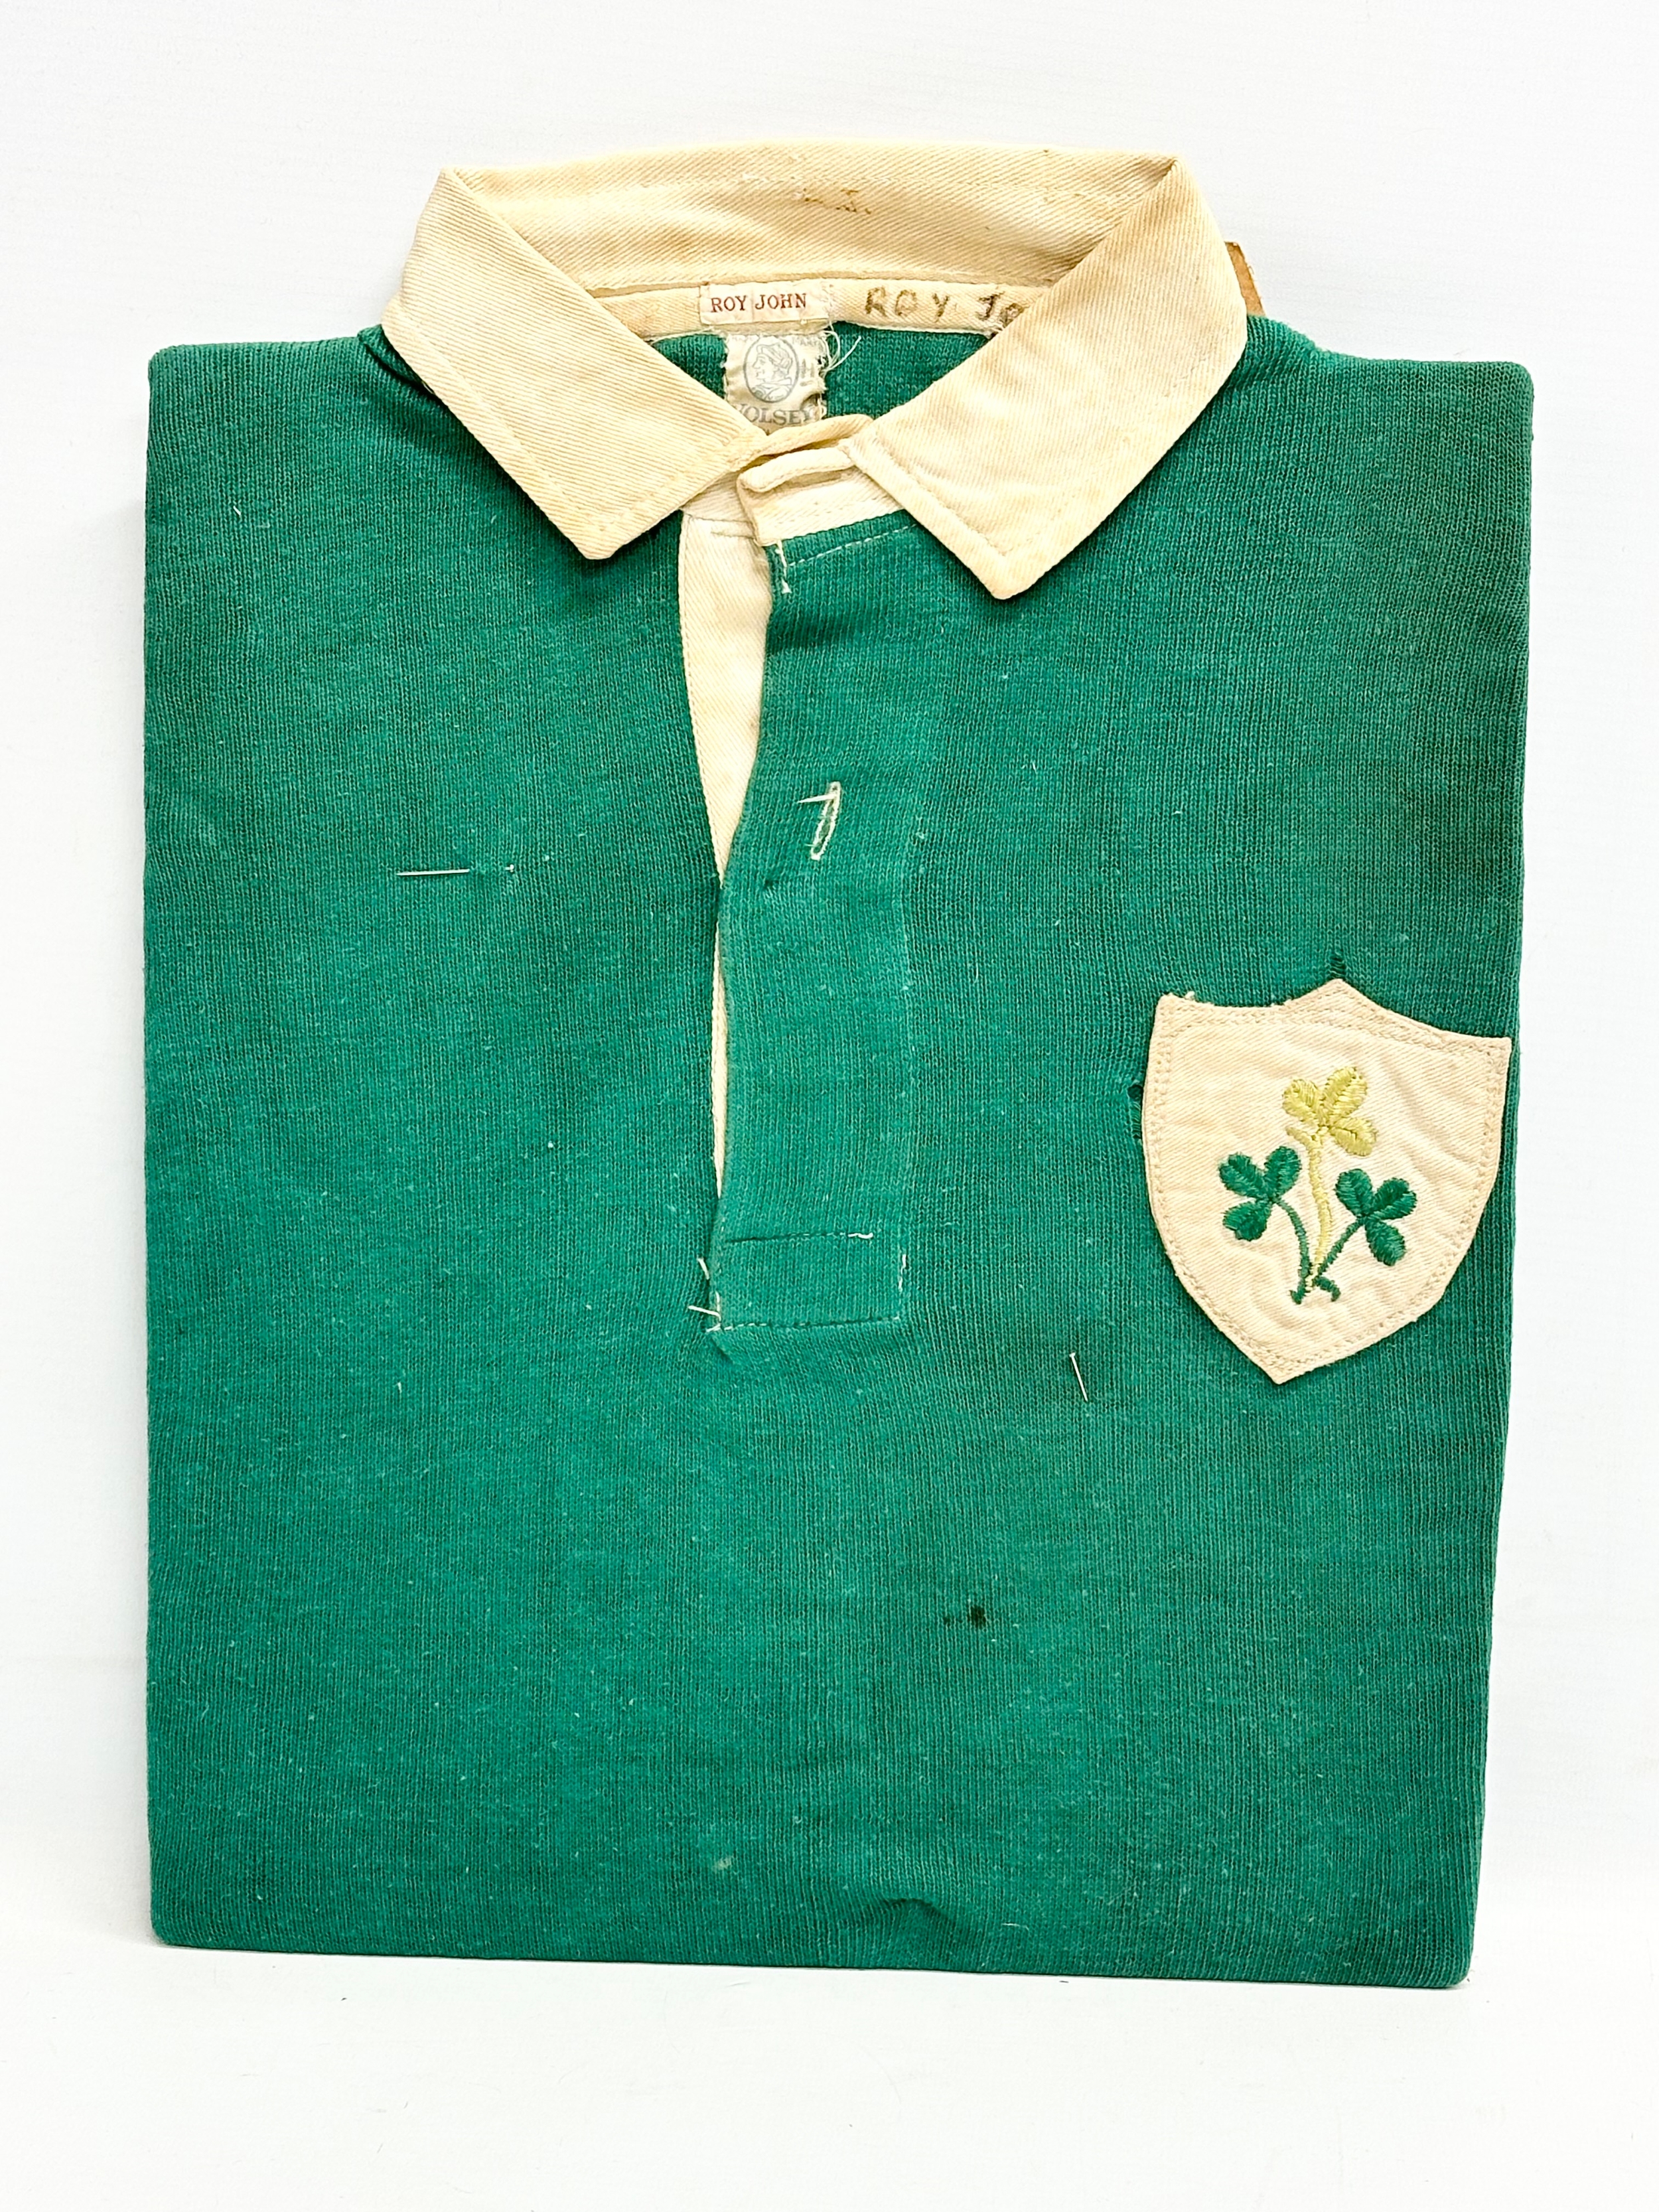 A vintage Irish Rugby top. Wolsey.